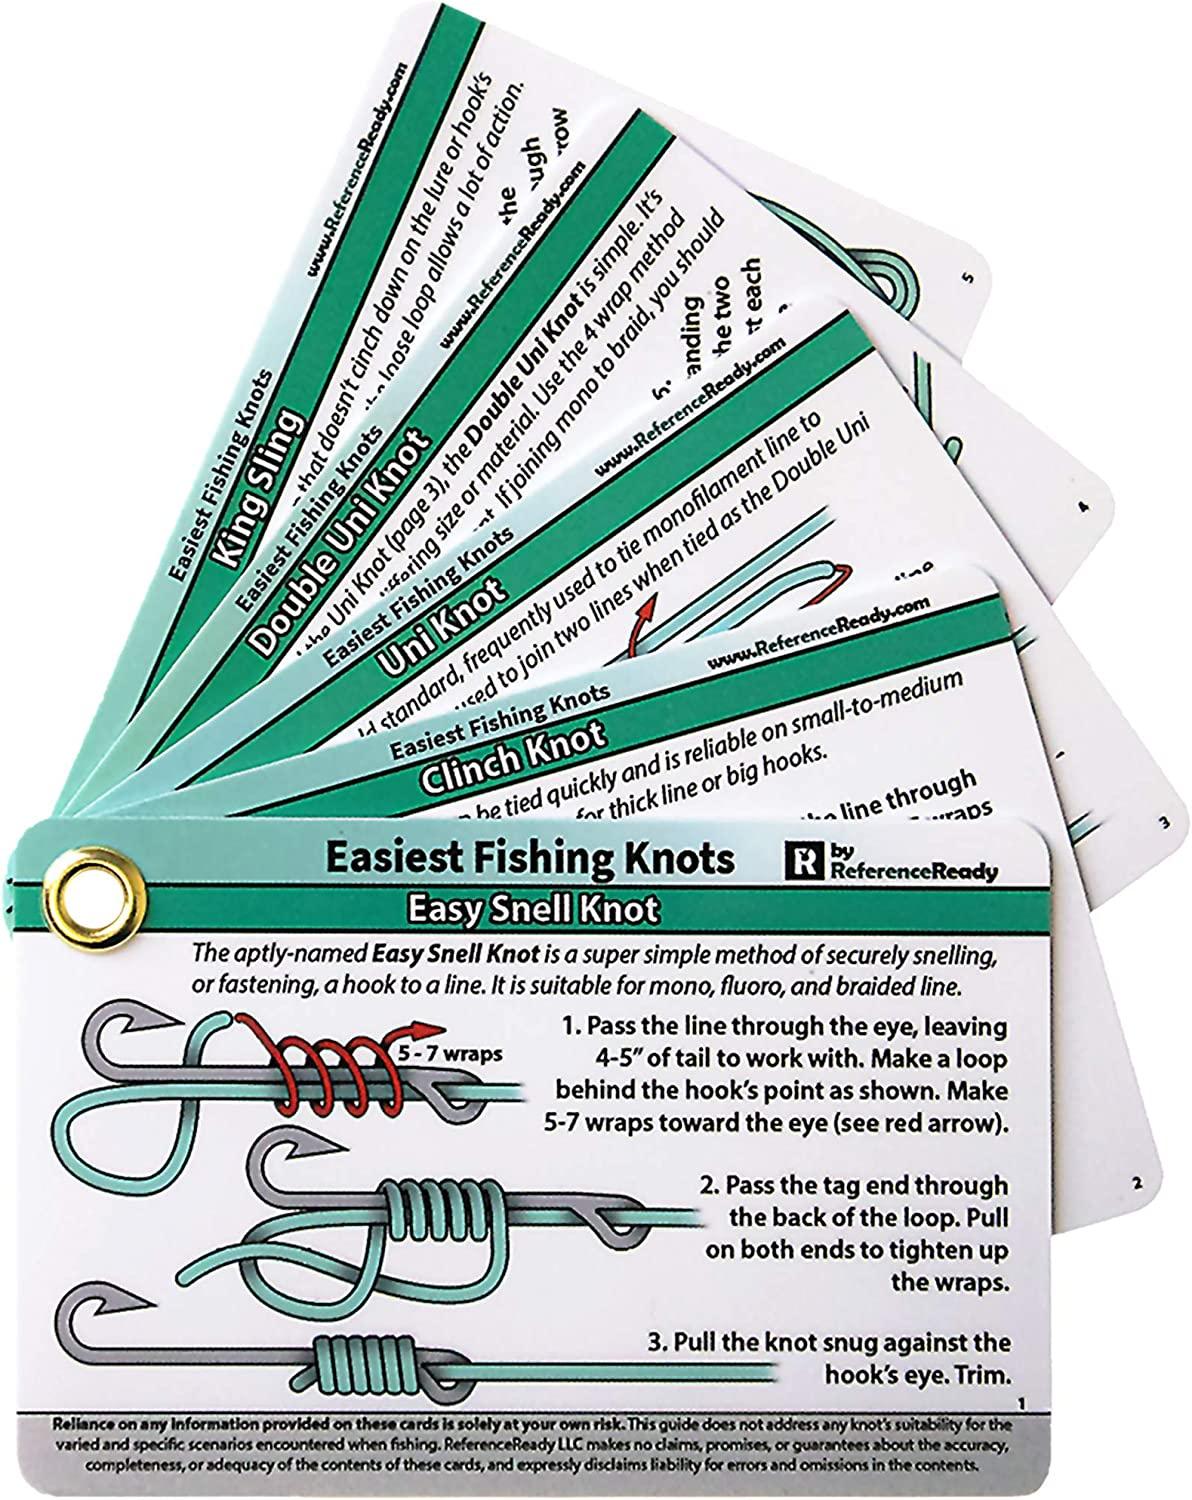 Easiest Fishing Knots - Waterproof Guide to 12 Simple Fishing Knots | How  to Tie Practical Fishing Knots & Includes Mini Carabiner | Perfect for